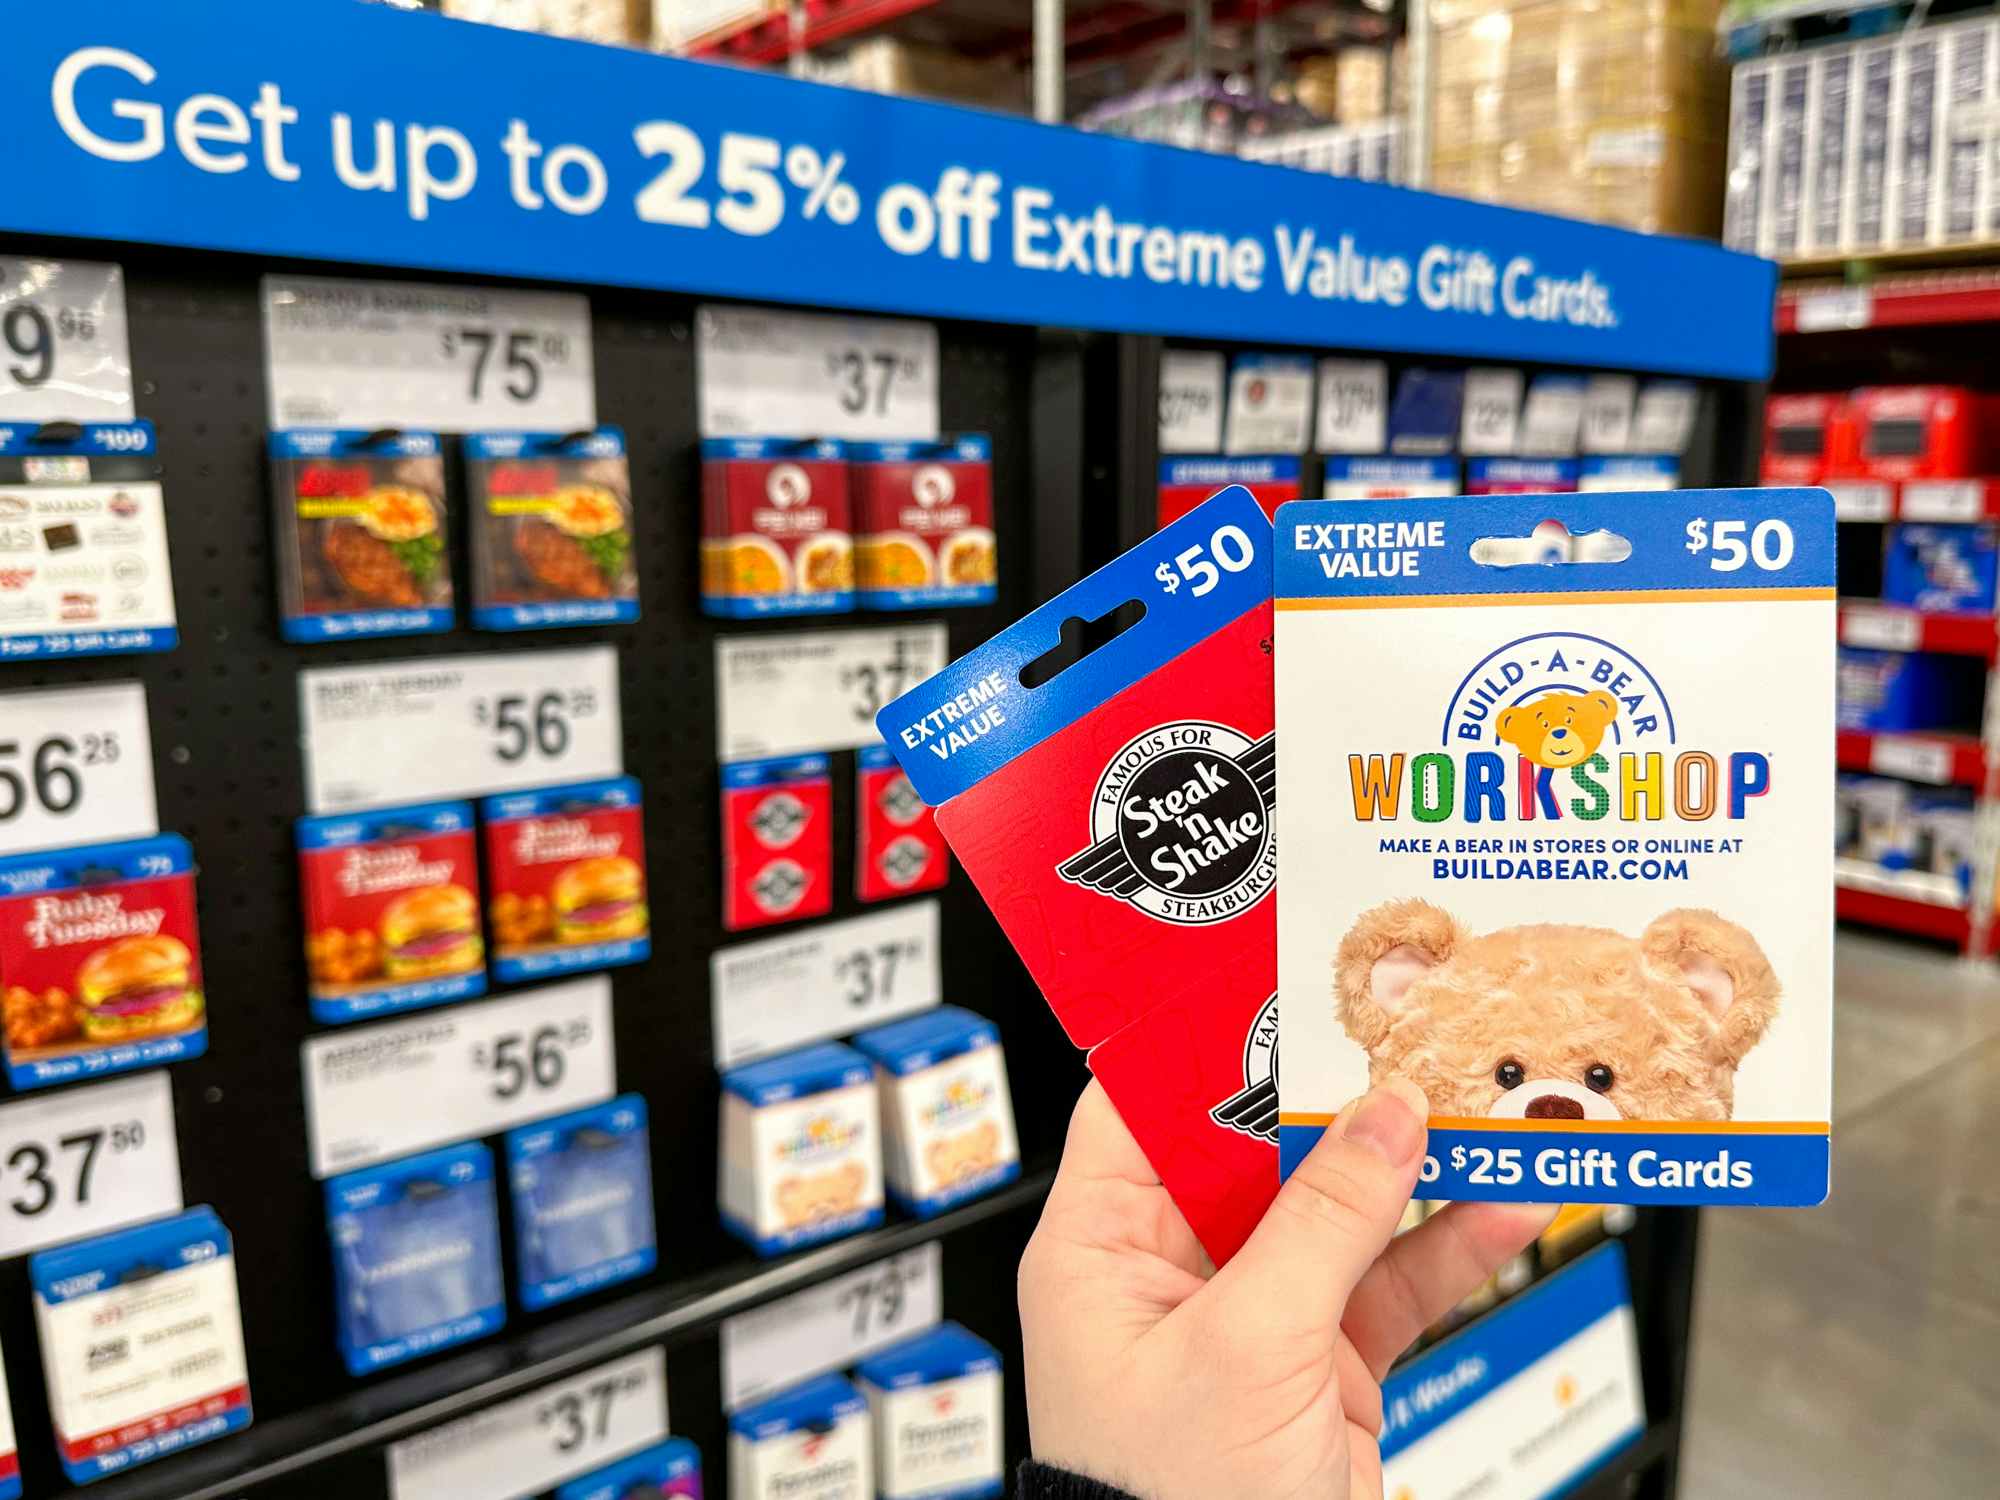 Someone holding up some gift cards in front of the Extreme Value gift card display in Sam's Club